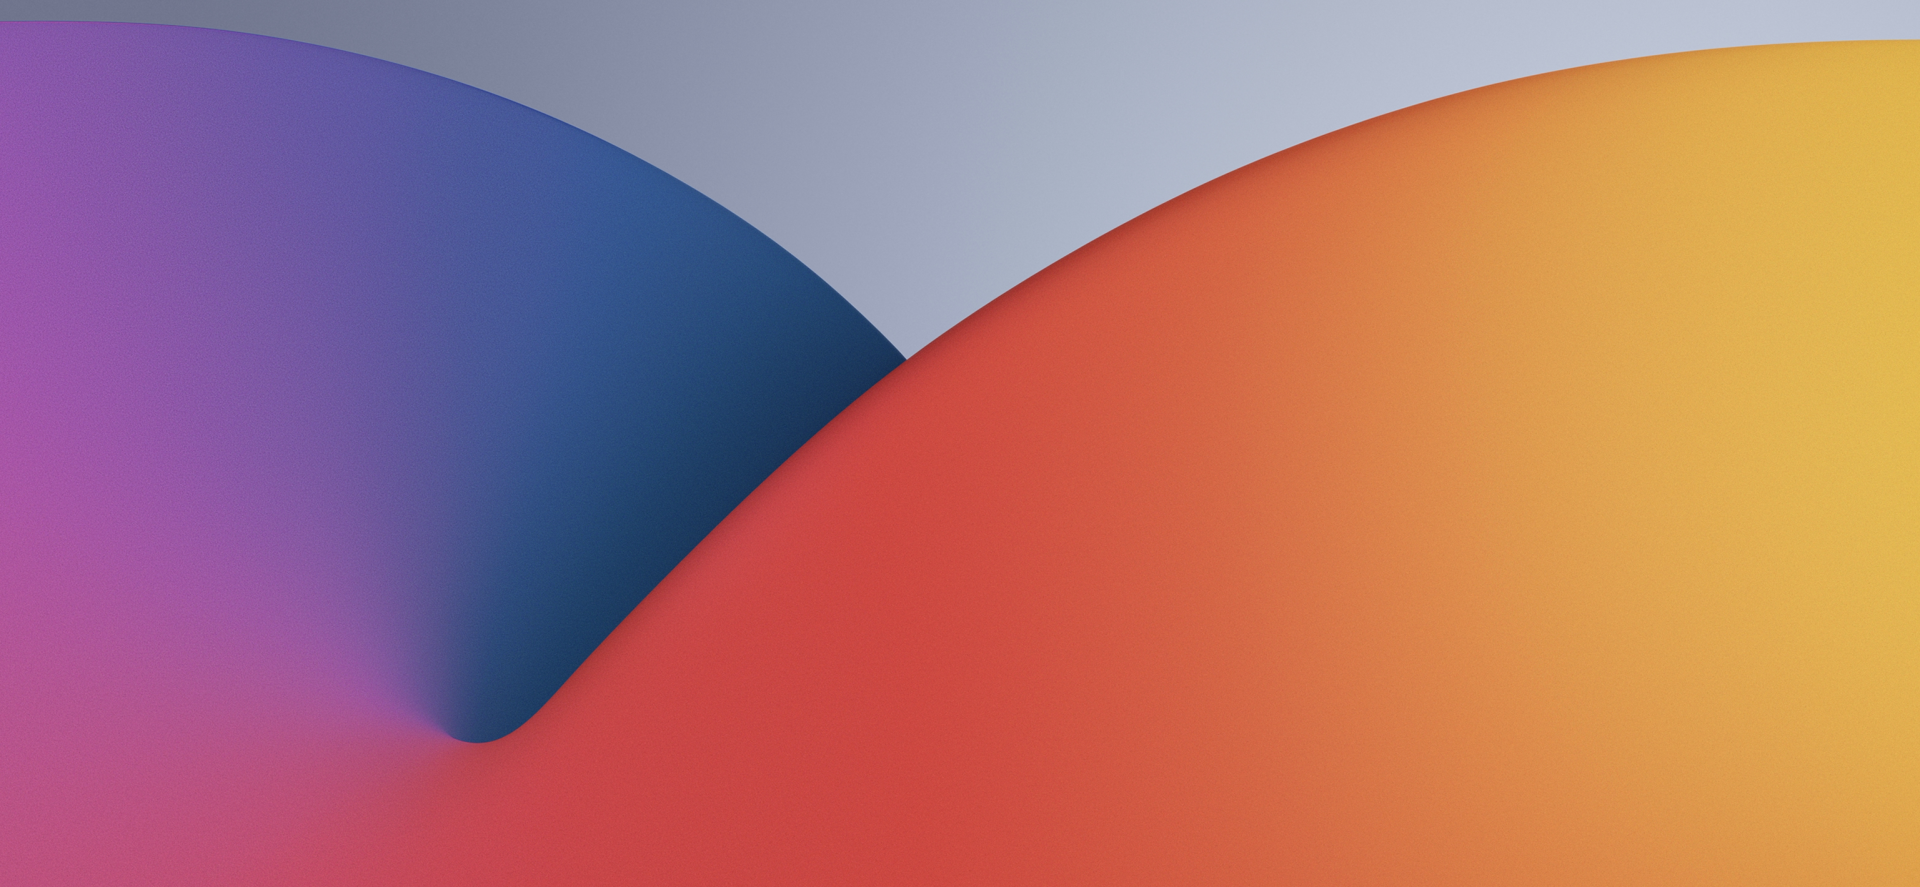 Download Apple Inc. Abstract Colors HD Wallpaper